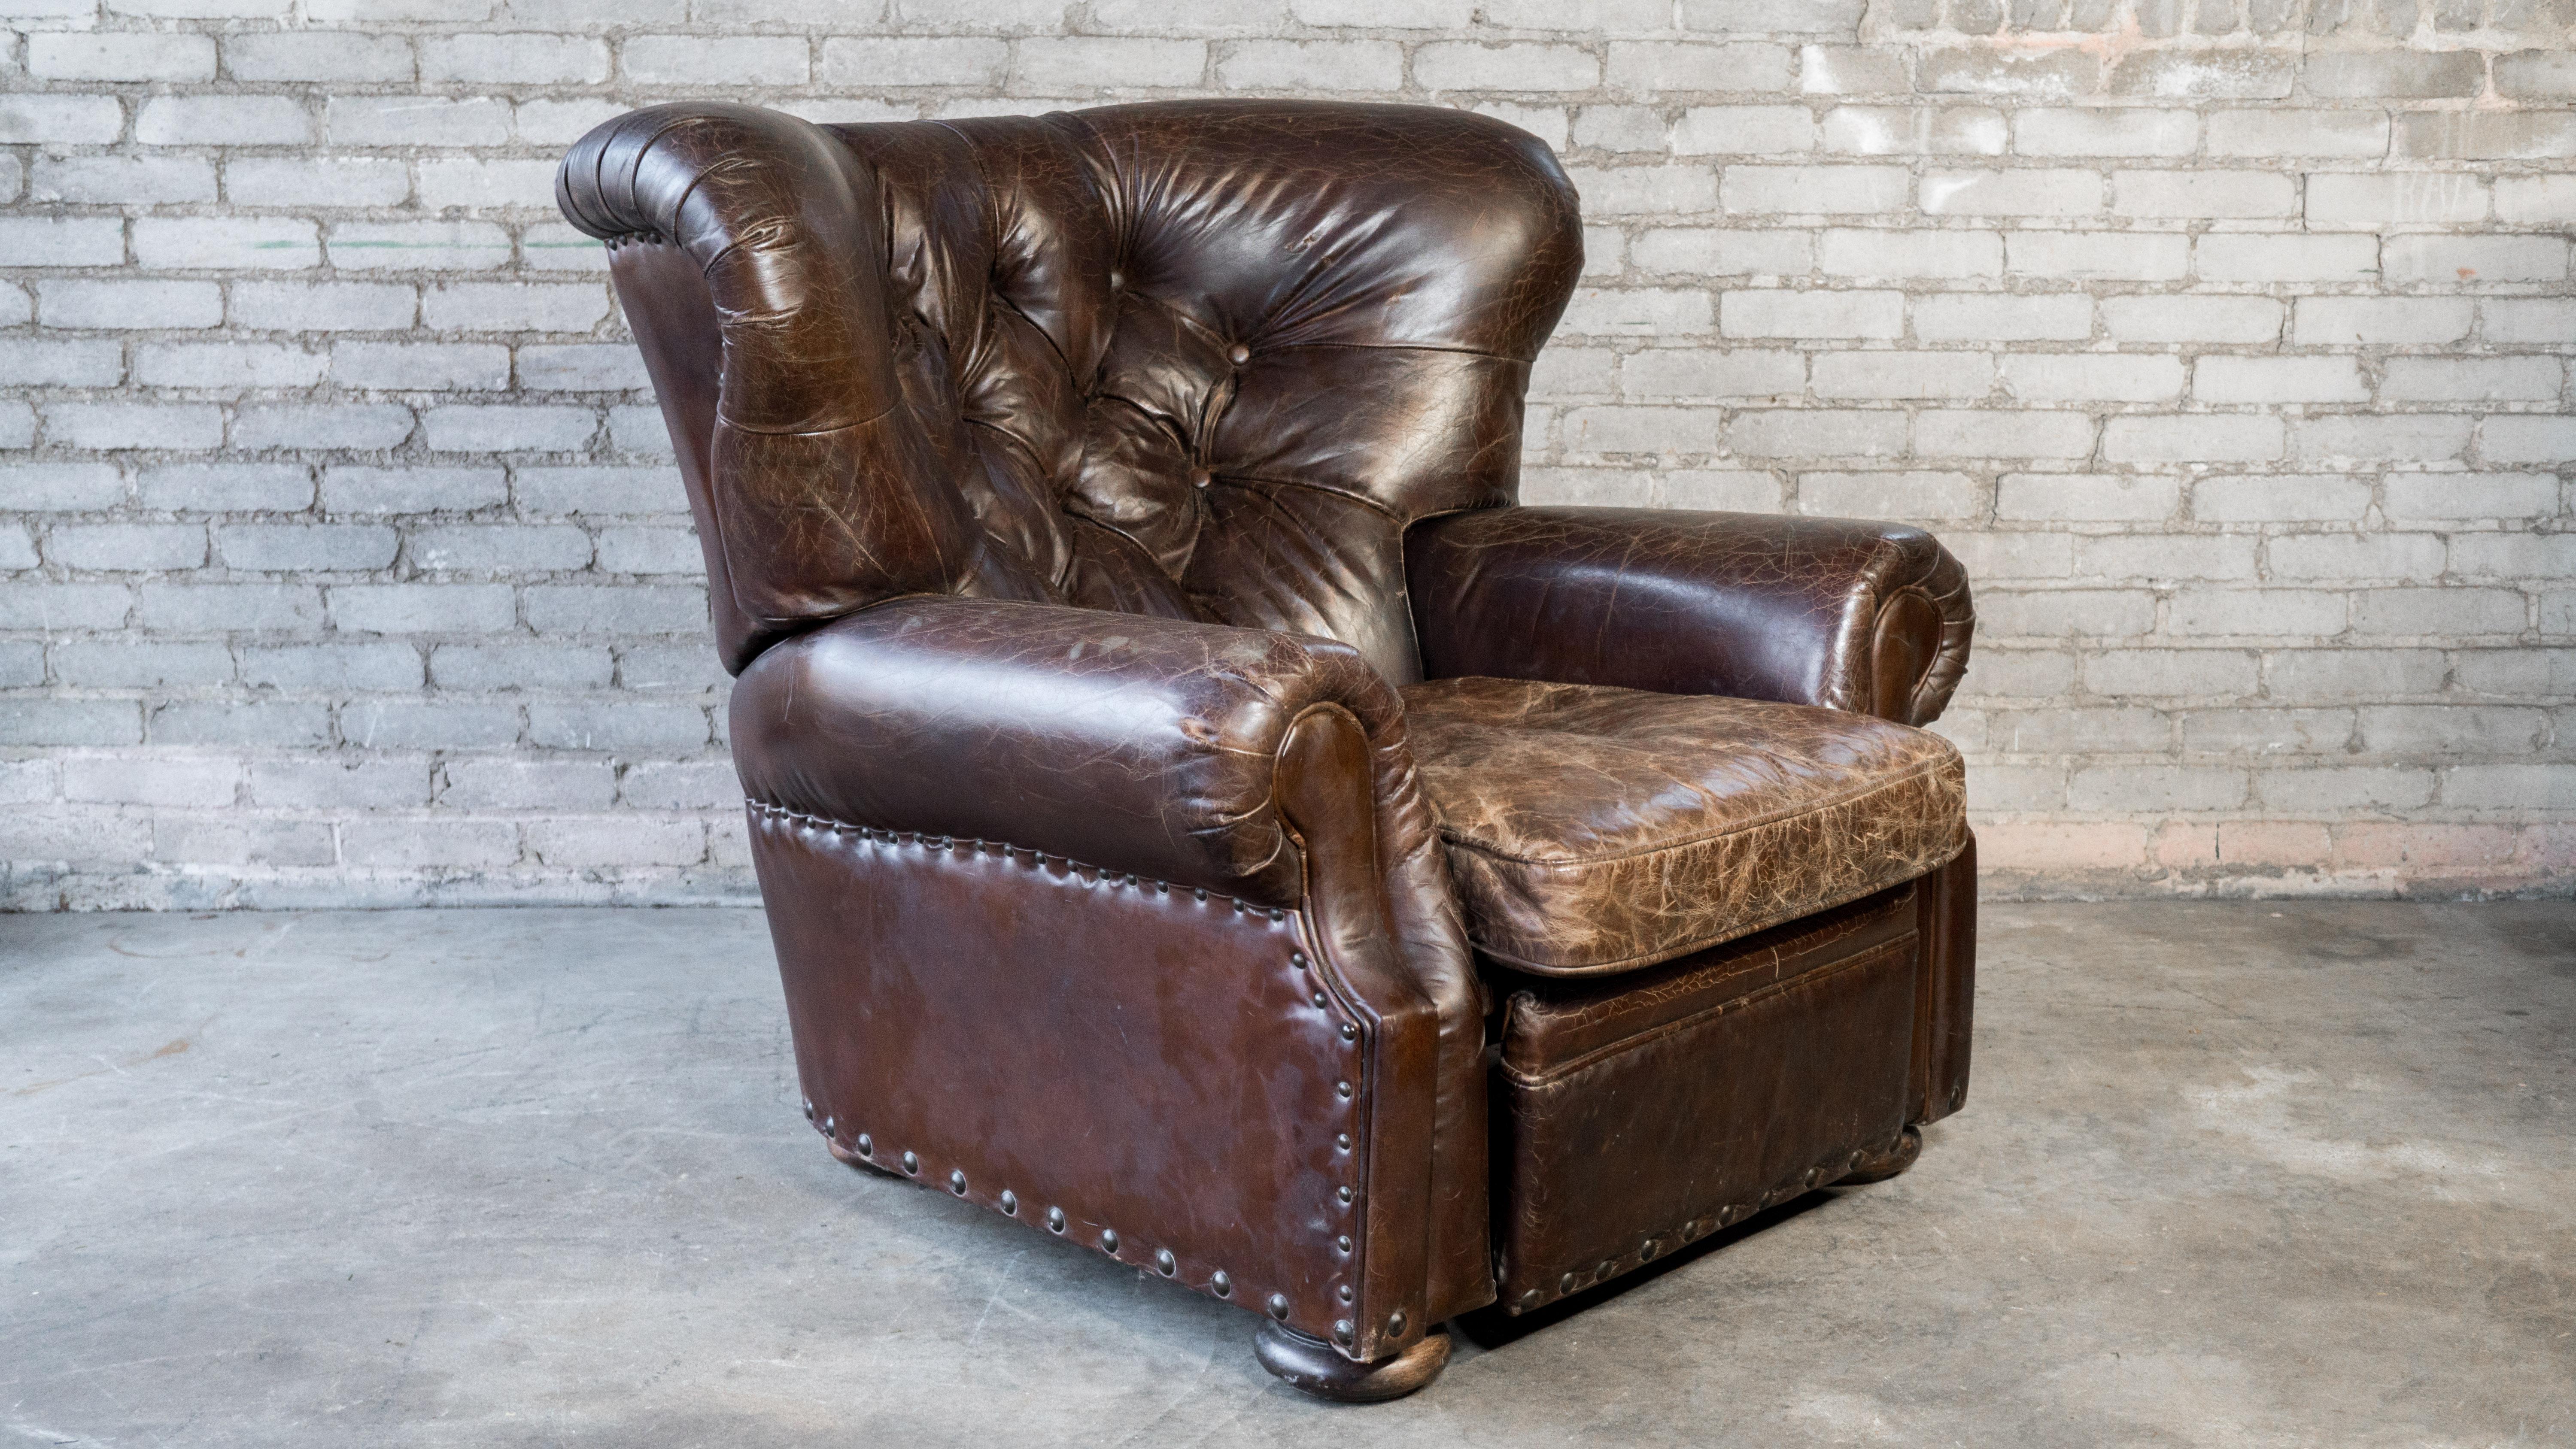 Contemporary Restoration Hardware Churchill Brown Leather Recliner Chair With Nailheads Trim For Sale